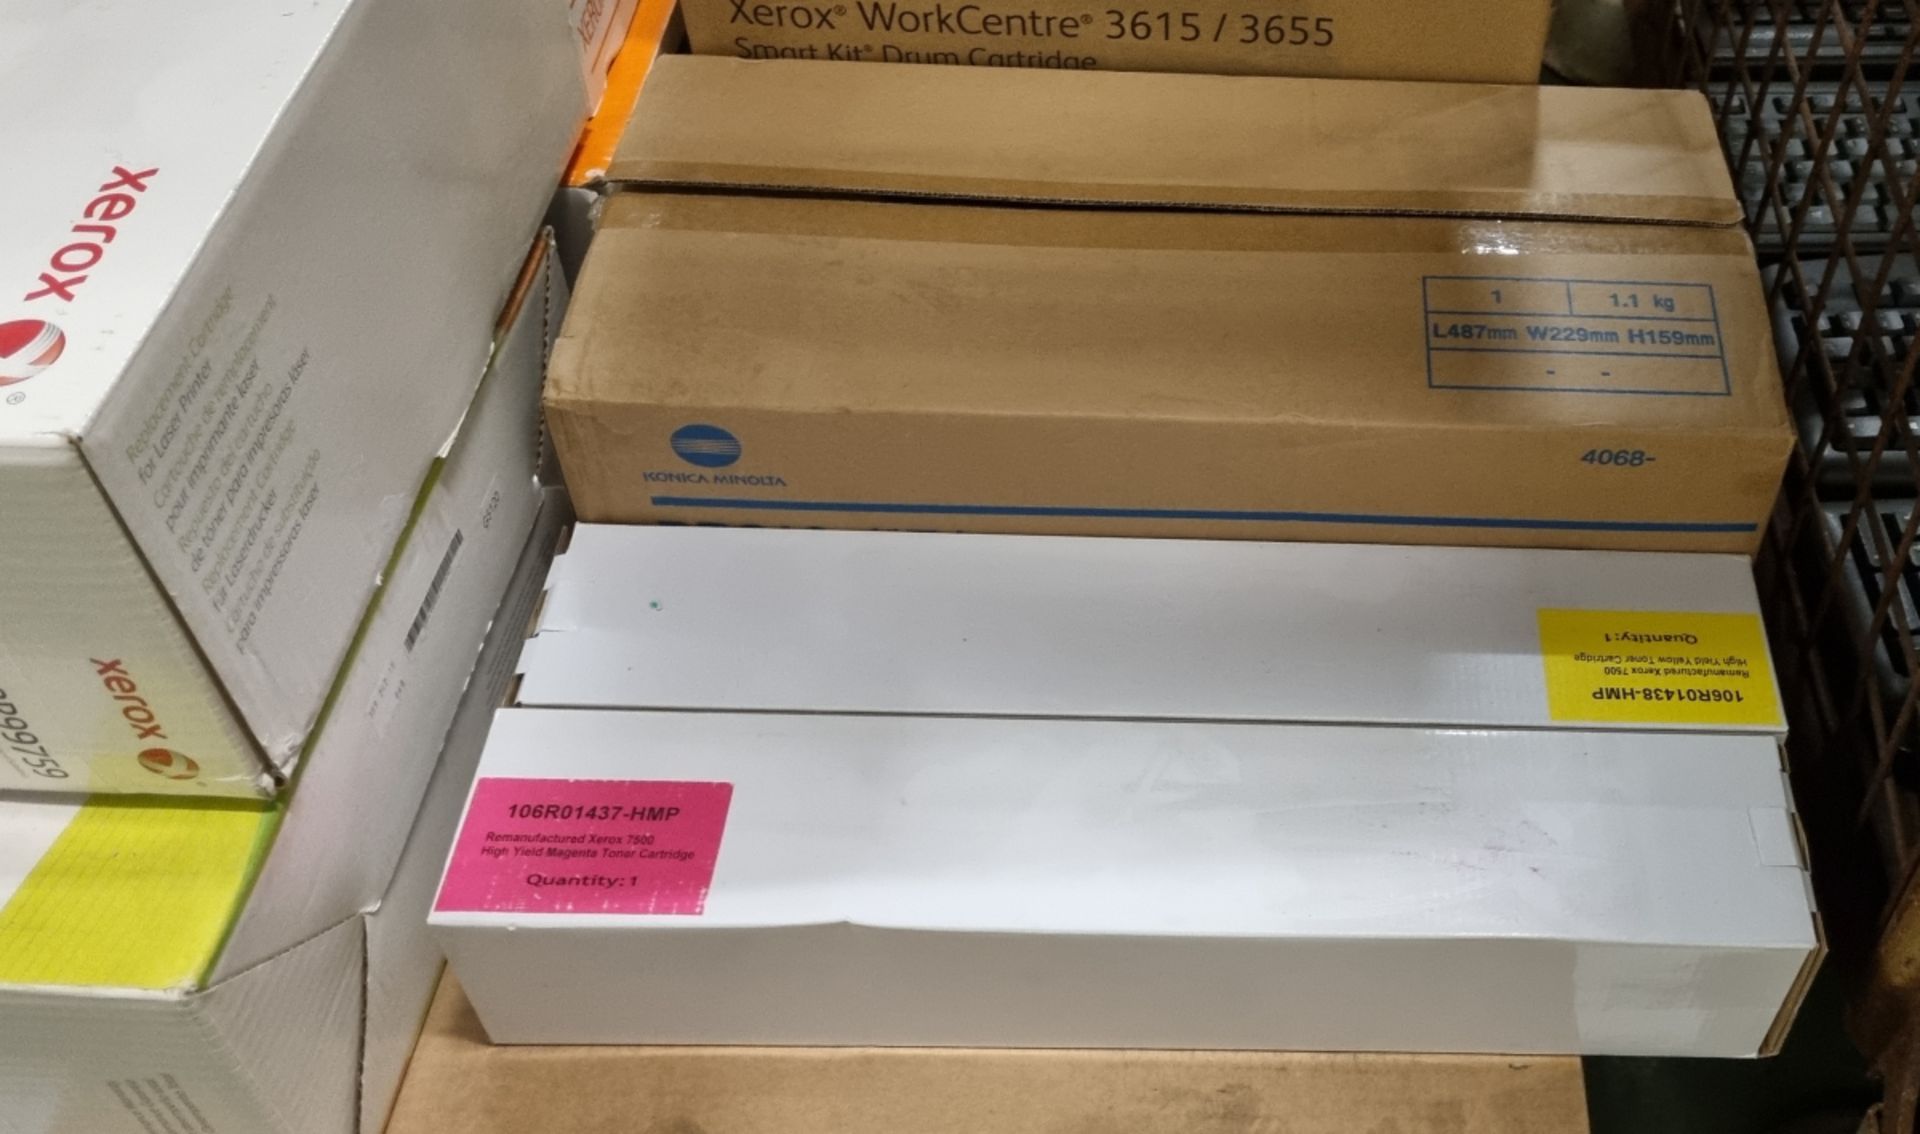 28x boxes of toners and transfer rollers - Xerox 6360, Xerox 7750, Xerox 3610 and HP 3600 - Image 7 of 7